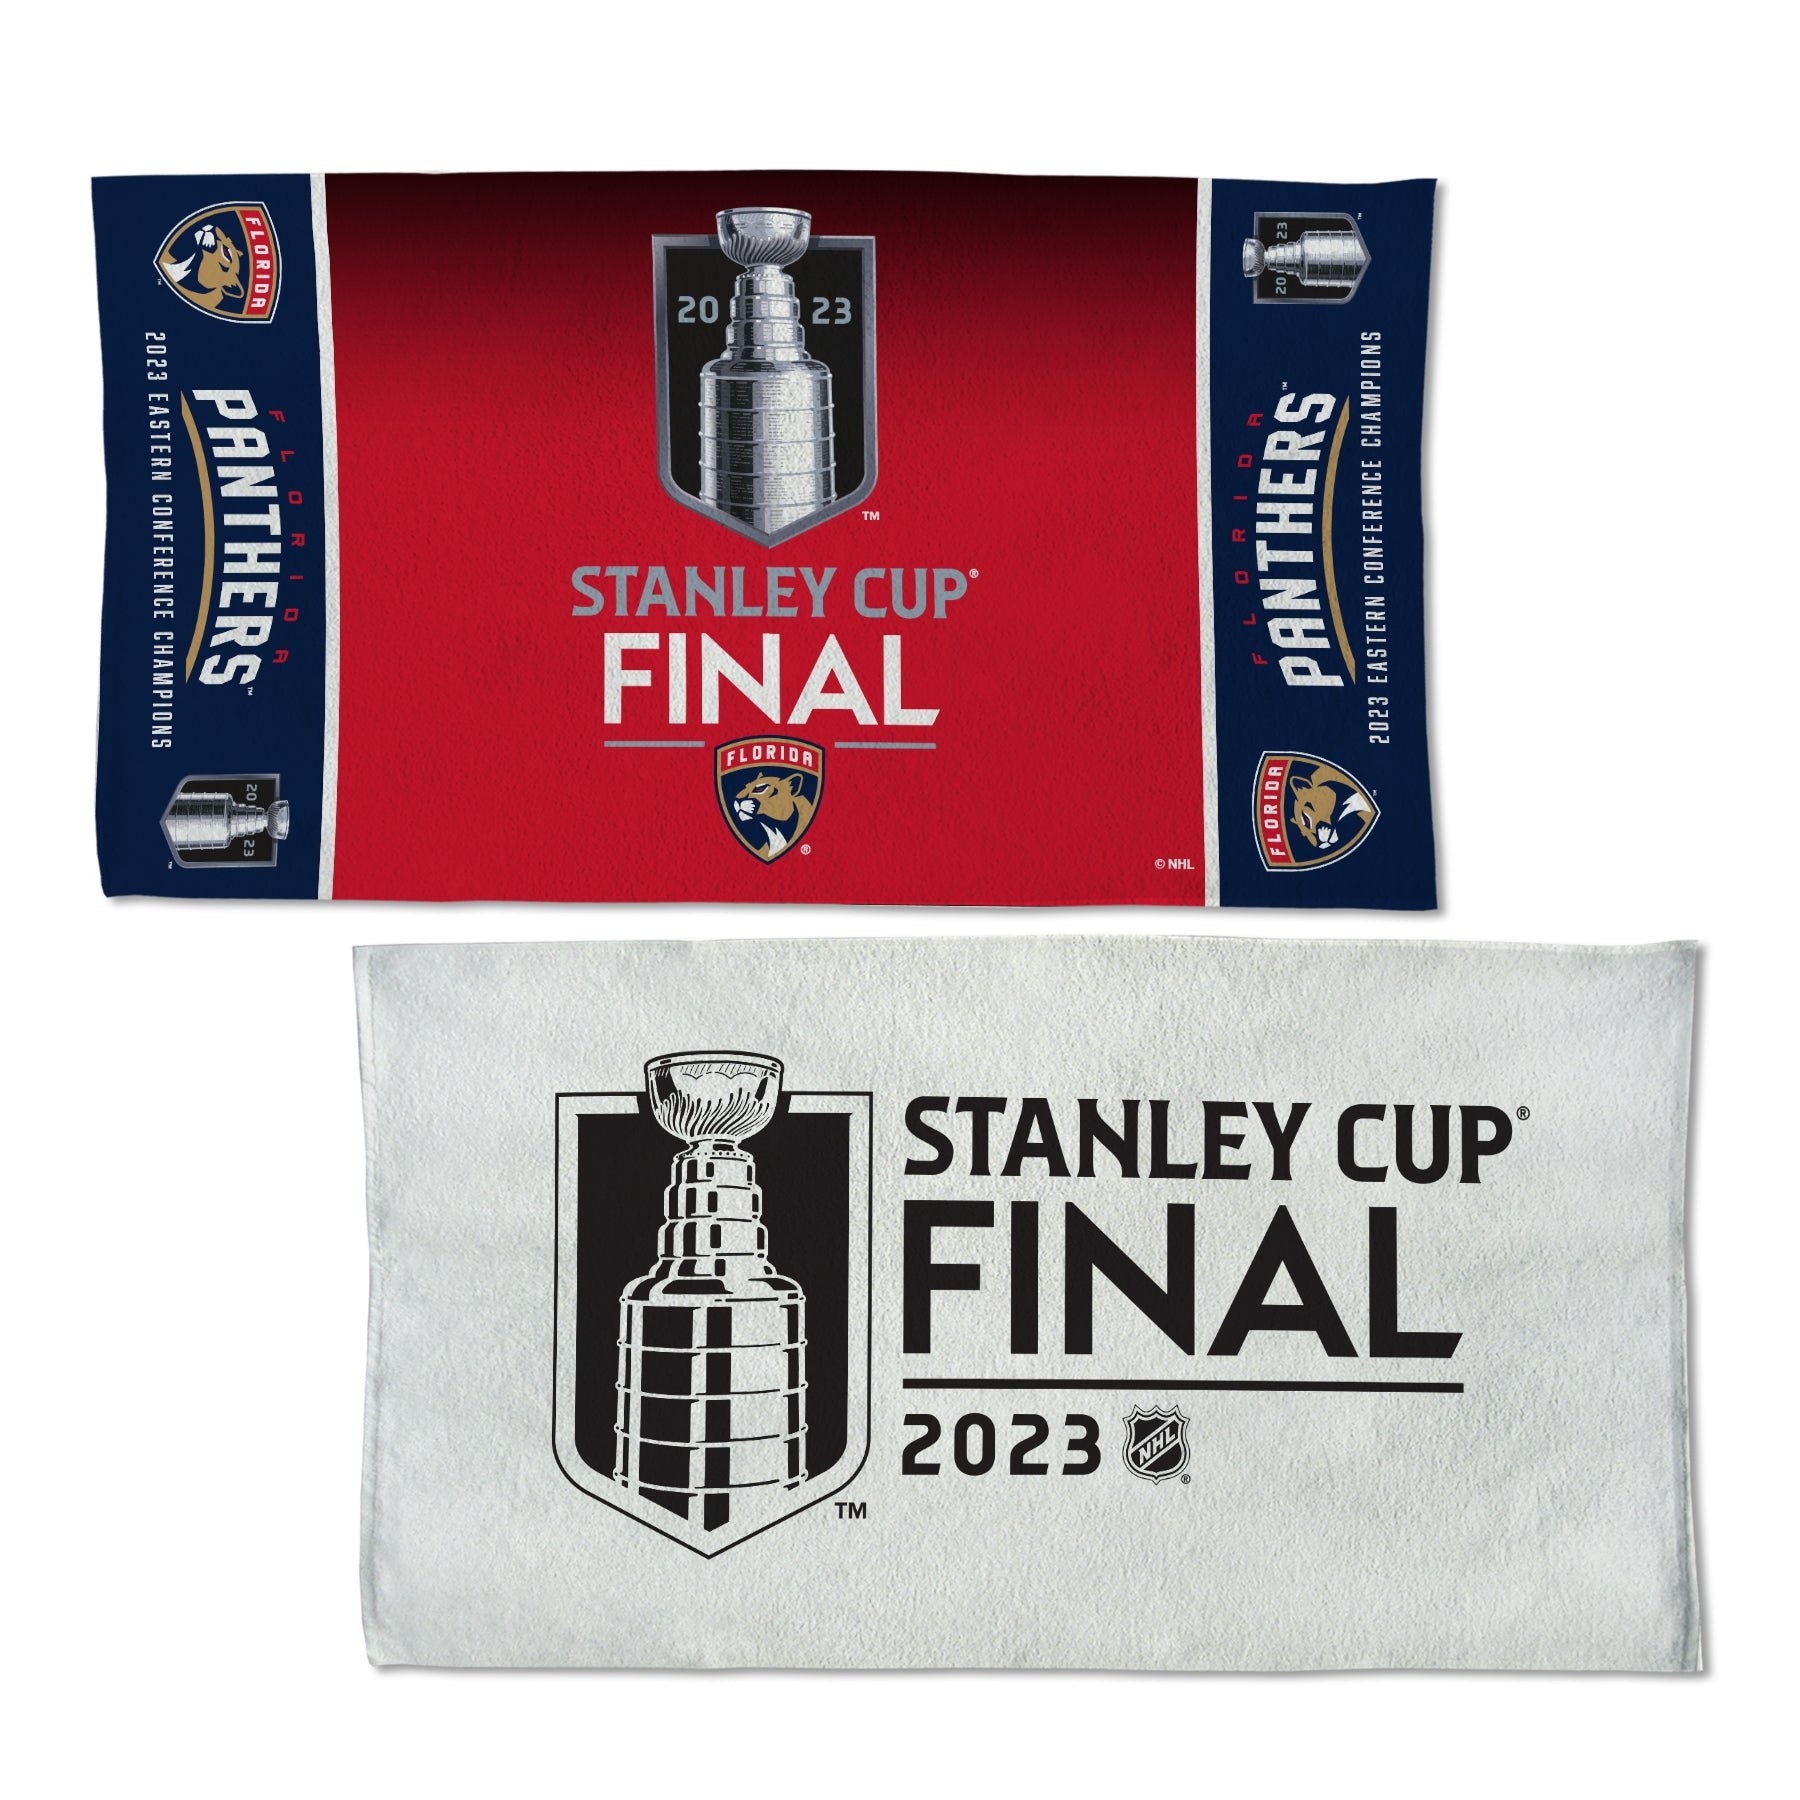 Florida Panthers NHL Eastern Conference champions gear and Stanley Cup  Final 2023 merch: How to get shirts, hats 